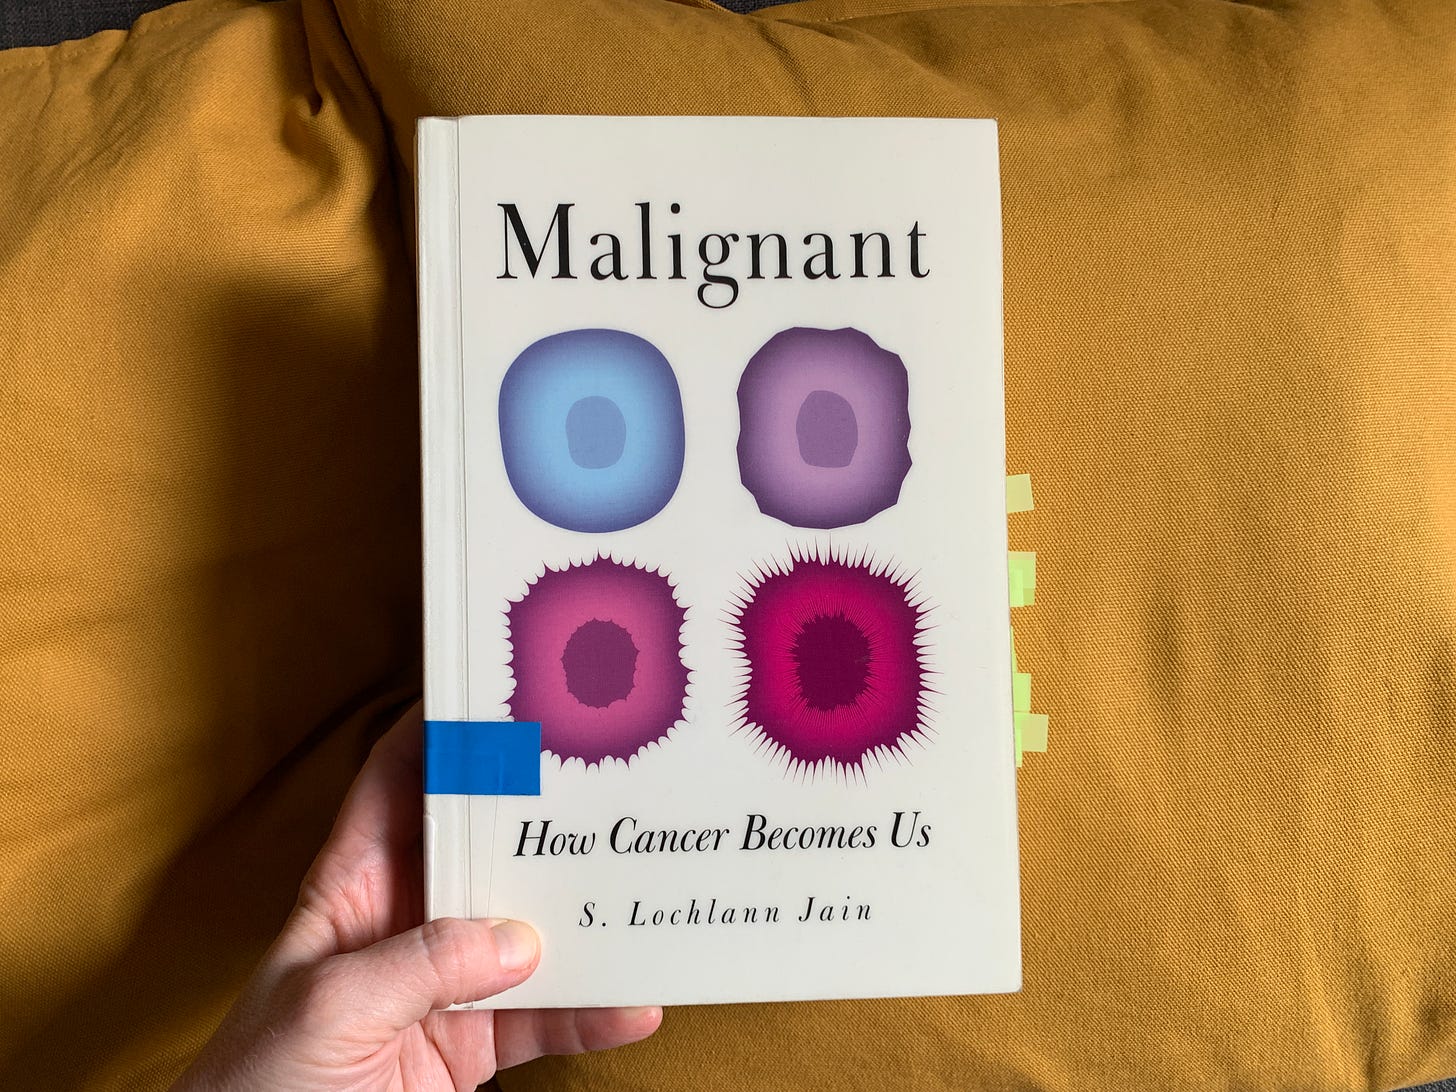 A photo of the front cover of the book Malignant on a mustard yellow background